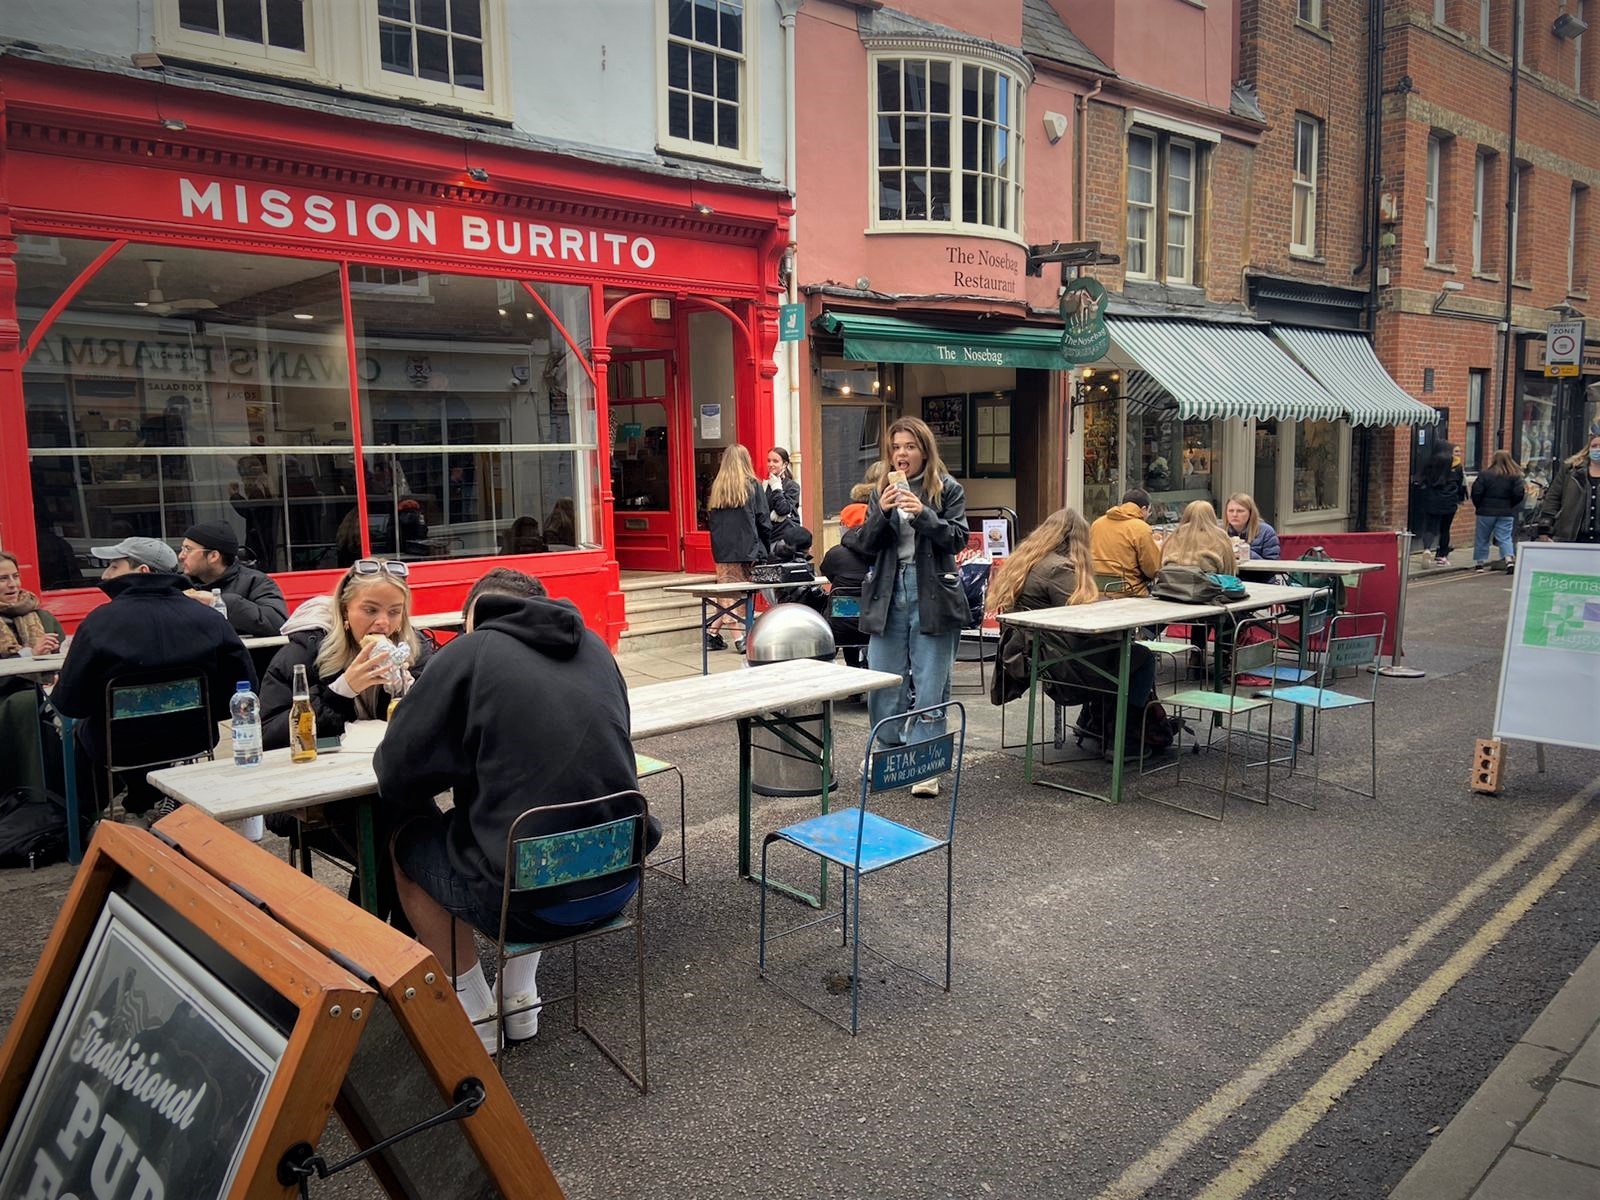 Mission Burrito, Oxford, on April 12 as it reopened. Picture: Oxford Mail